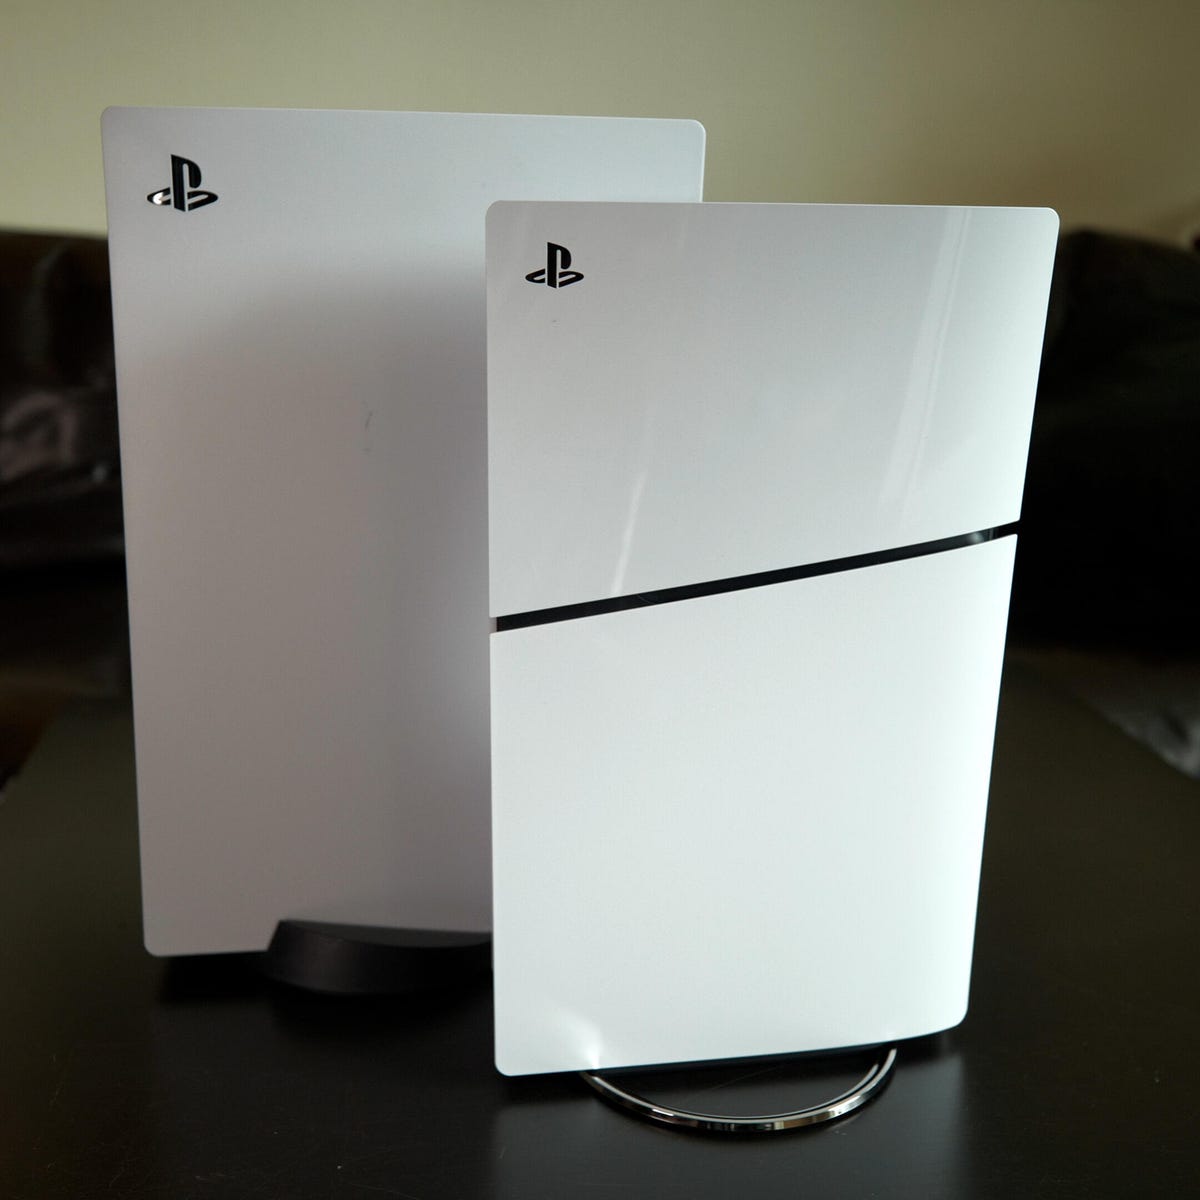 First in hand look at the PlayStation 5 “Slim” with a side by side